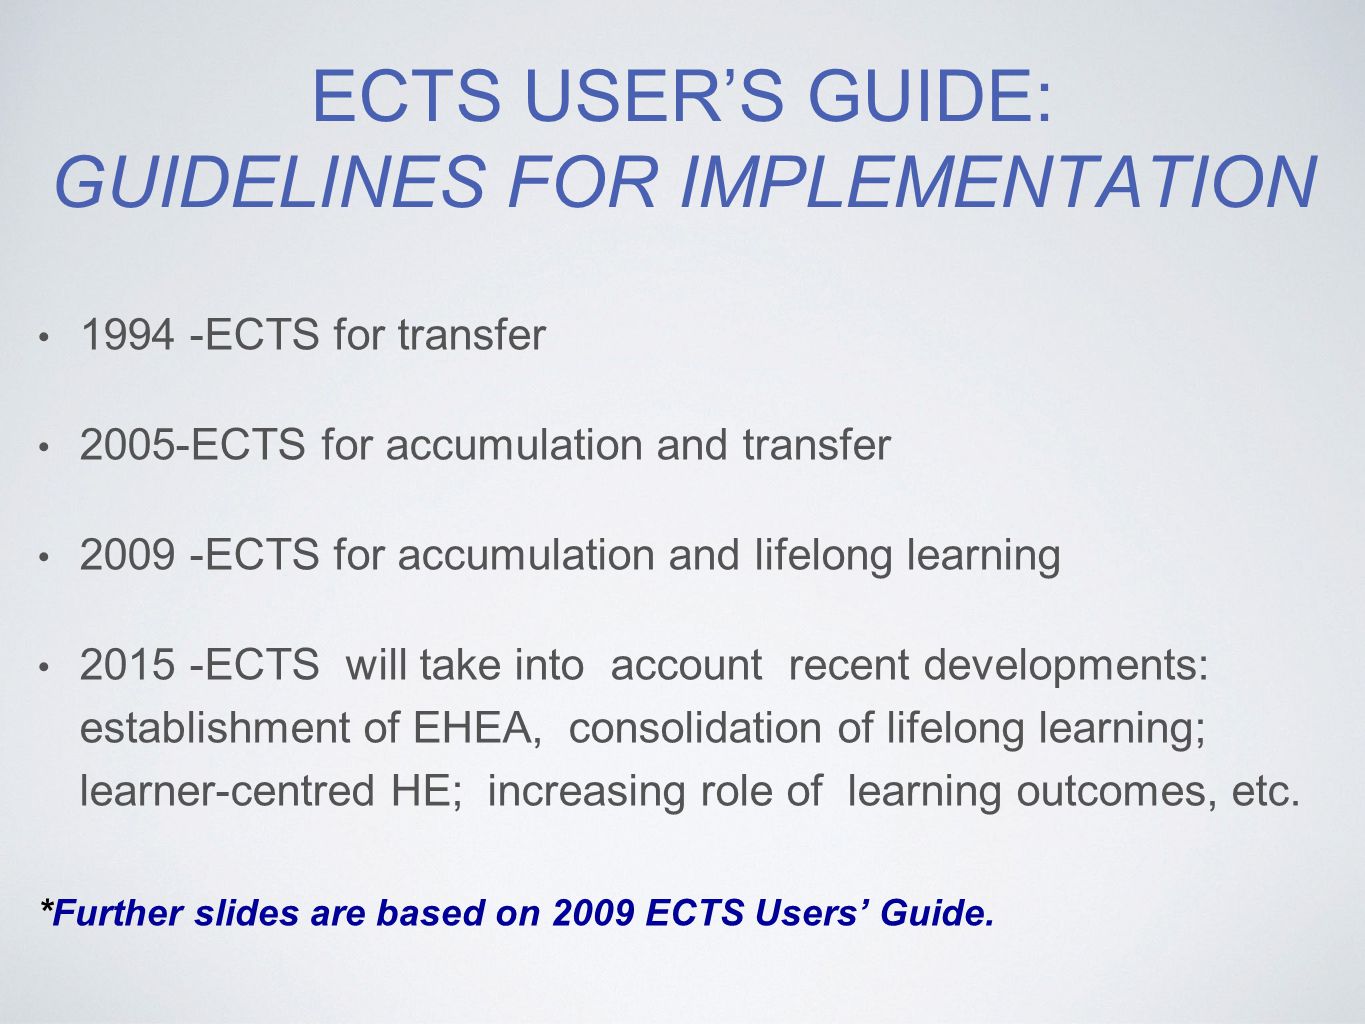 ECTS USER’S GUIDE: GUIDELINES FOR IMPLEMENTATION ECTS for transfer 2005-ECTS for accumulation and transfer ECTS for accumulation and lifelong learning ECTS will take into account recent developments: establishment of EHEA, consolidation of lifelong learning; learner-centred HE; increasing role of learning outcomes, etc.